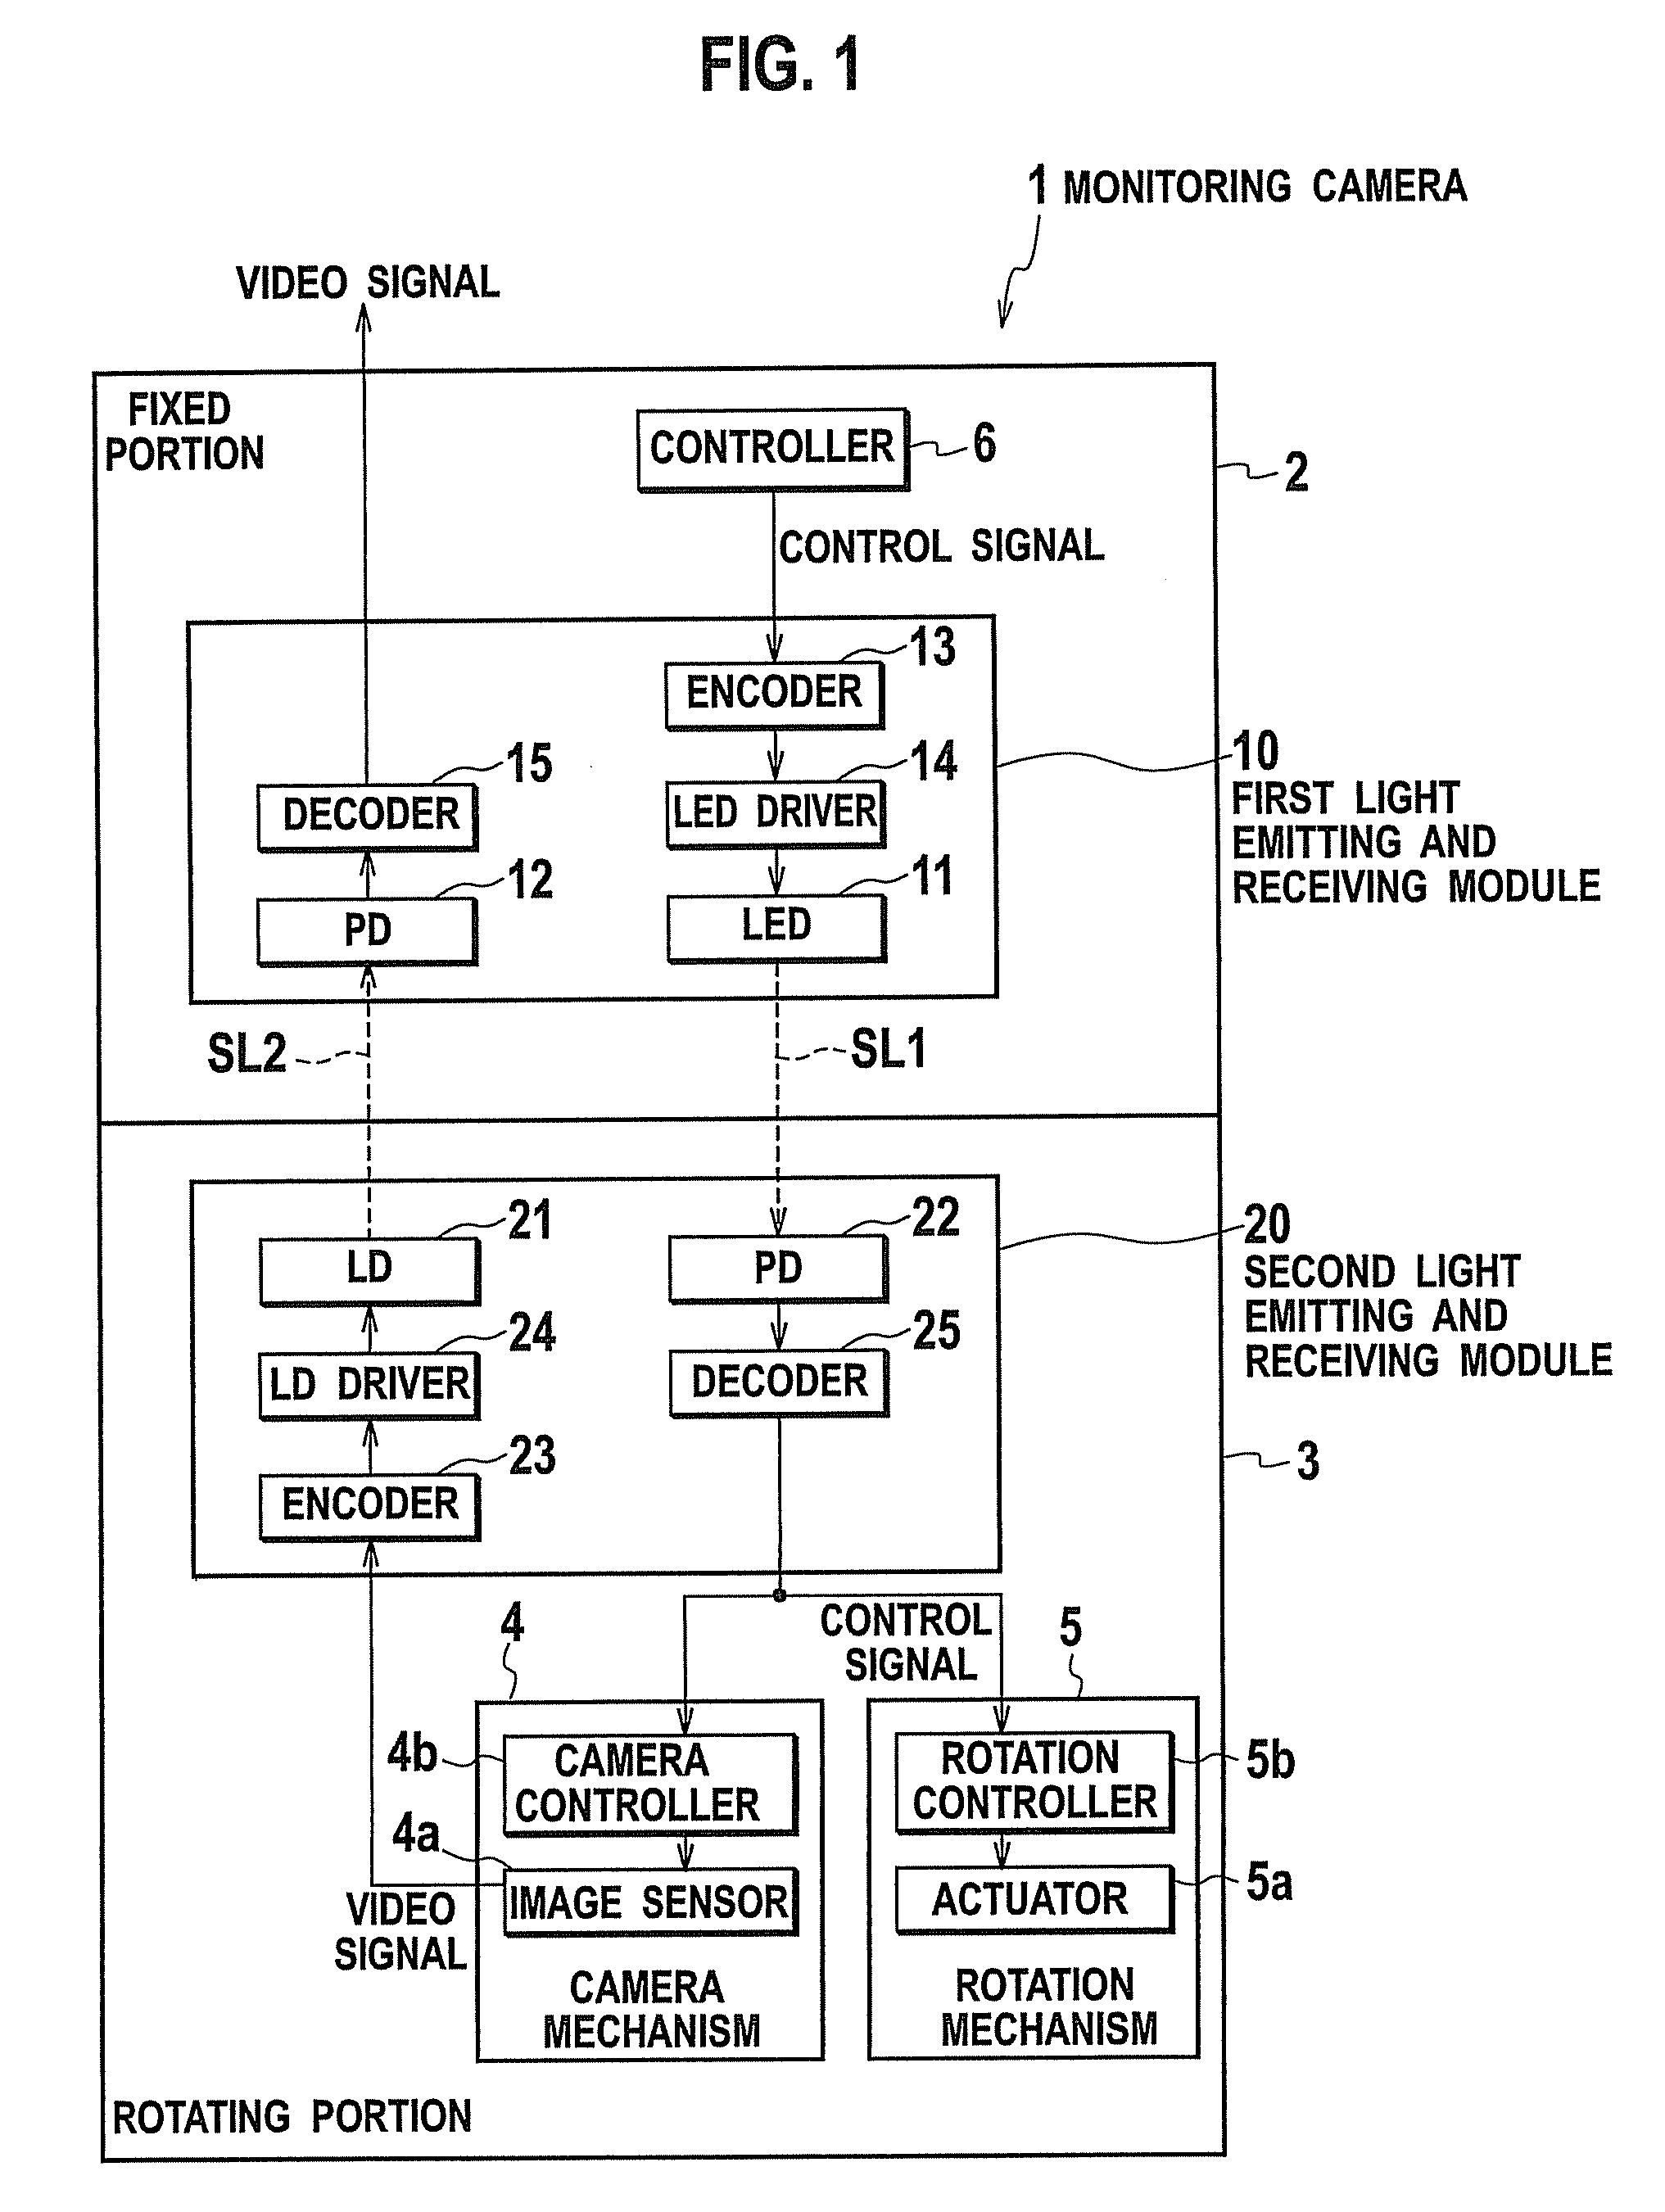 Optical space transmission device including rotatable member